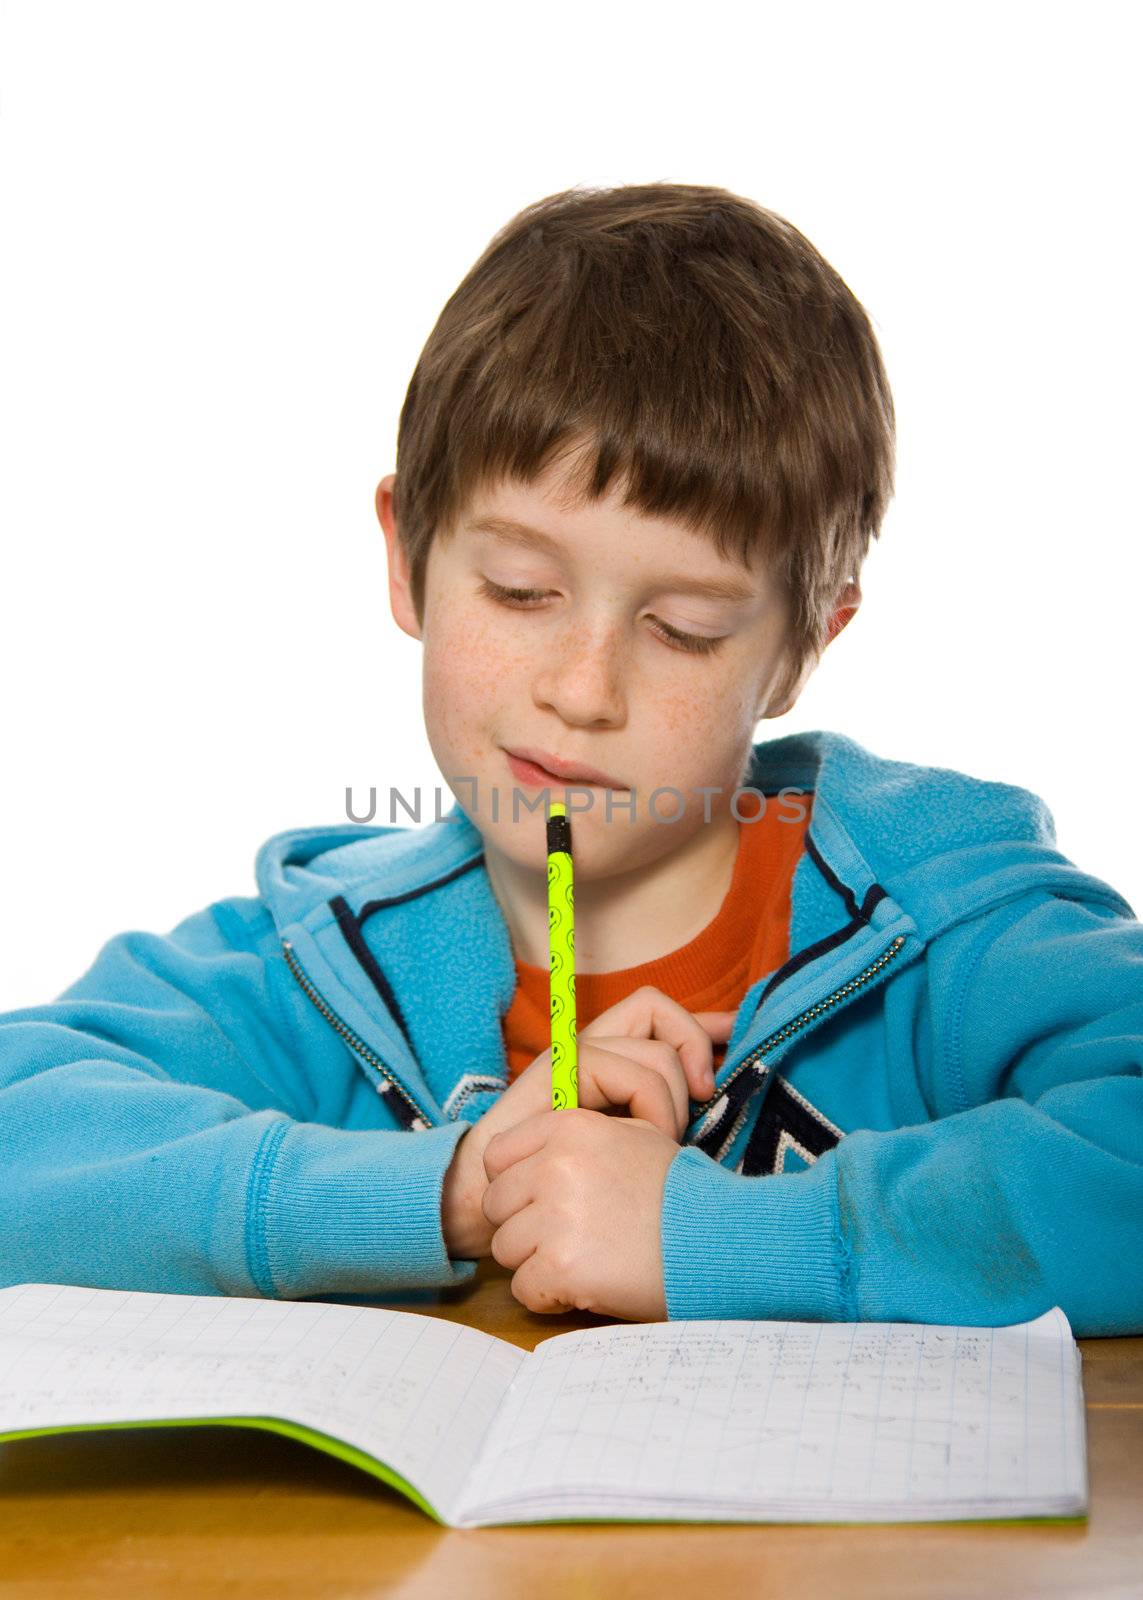 Young boy frowning over his homework, against a white background